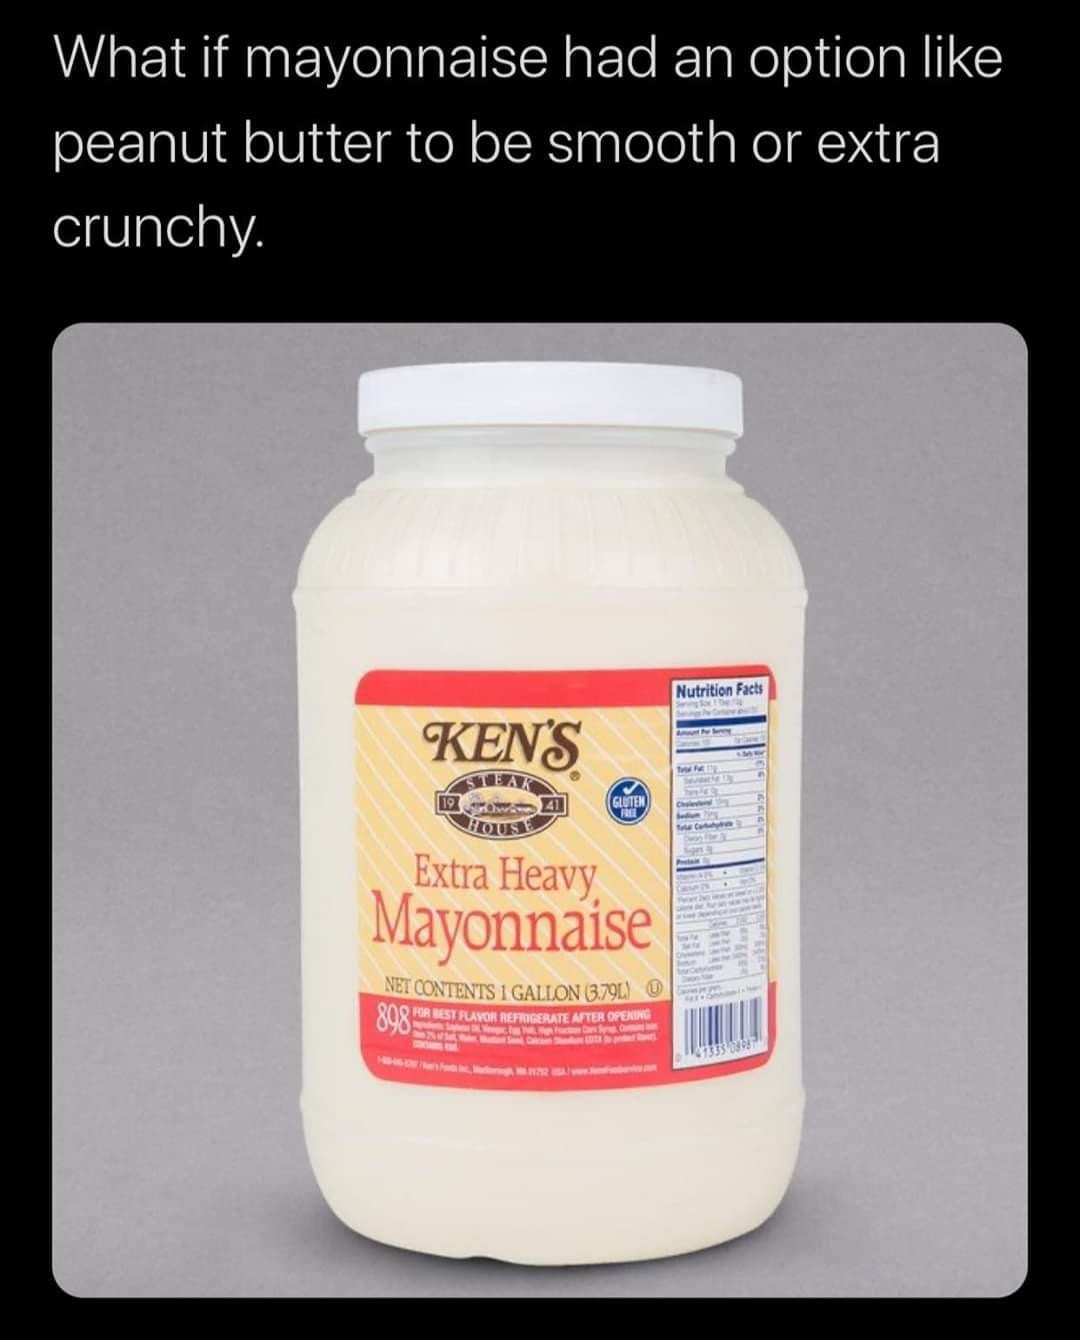 ken's foods - What if mayonnaise had an option peanut butter to be smooth or extra crunchy. Nutrition Facts Kens 41 Gluten Extra Heavy Mayonnaise 898 Net Contents 1 Gallon 3.79L O For Best Flavor Refrigerate After Opening car 1113319